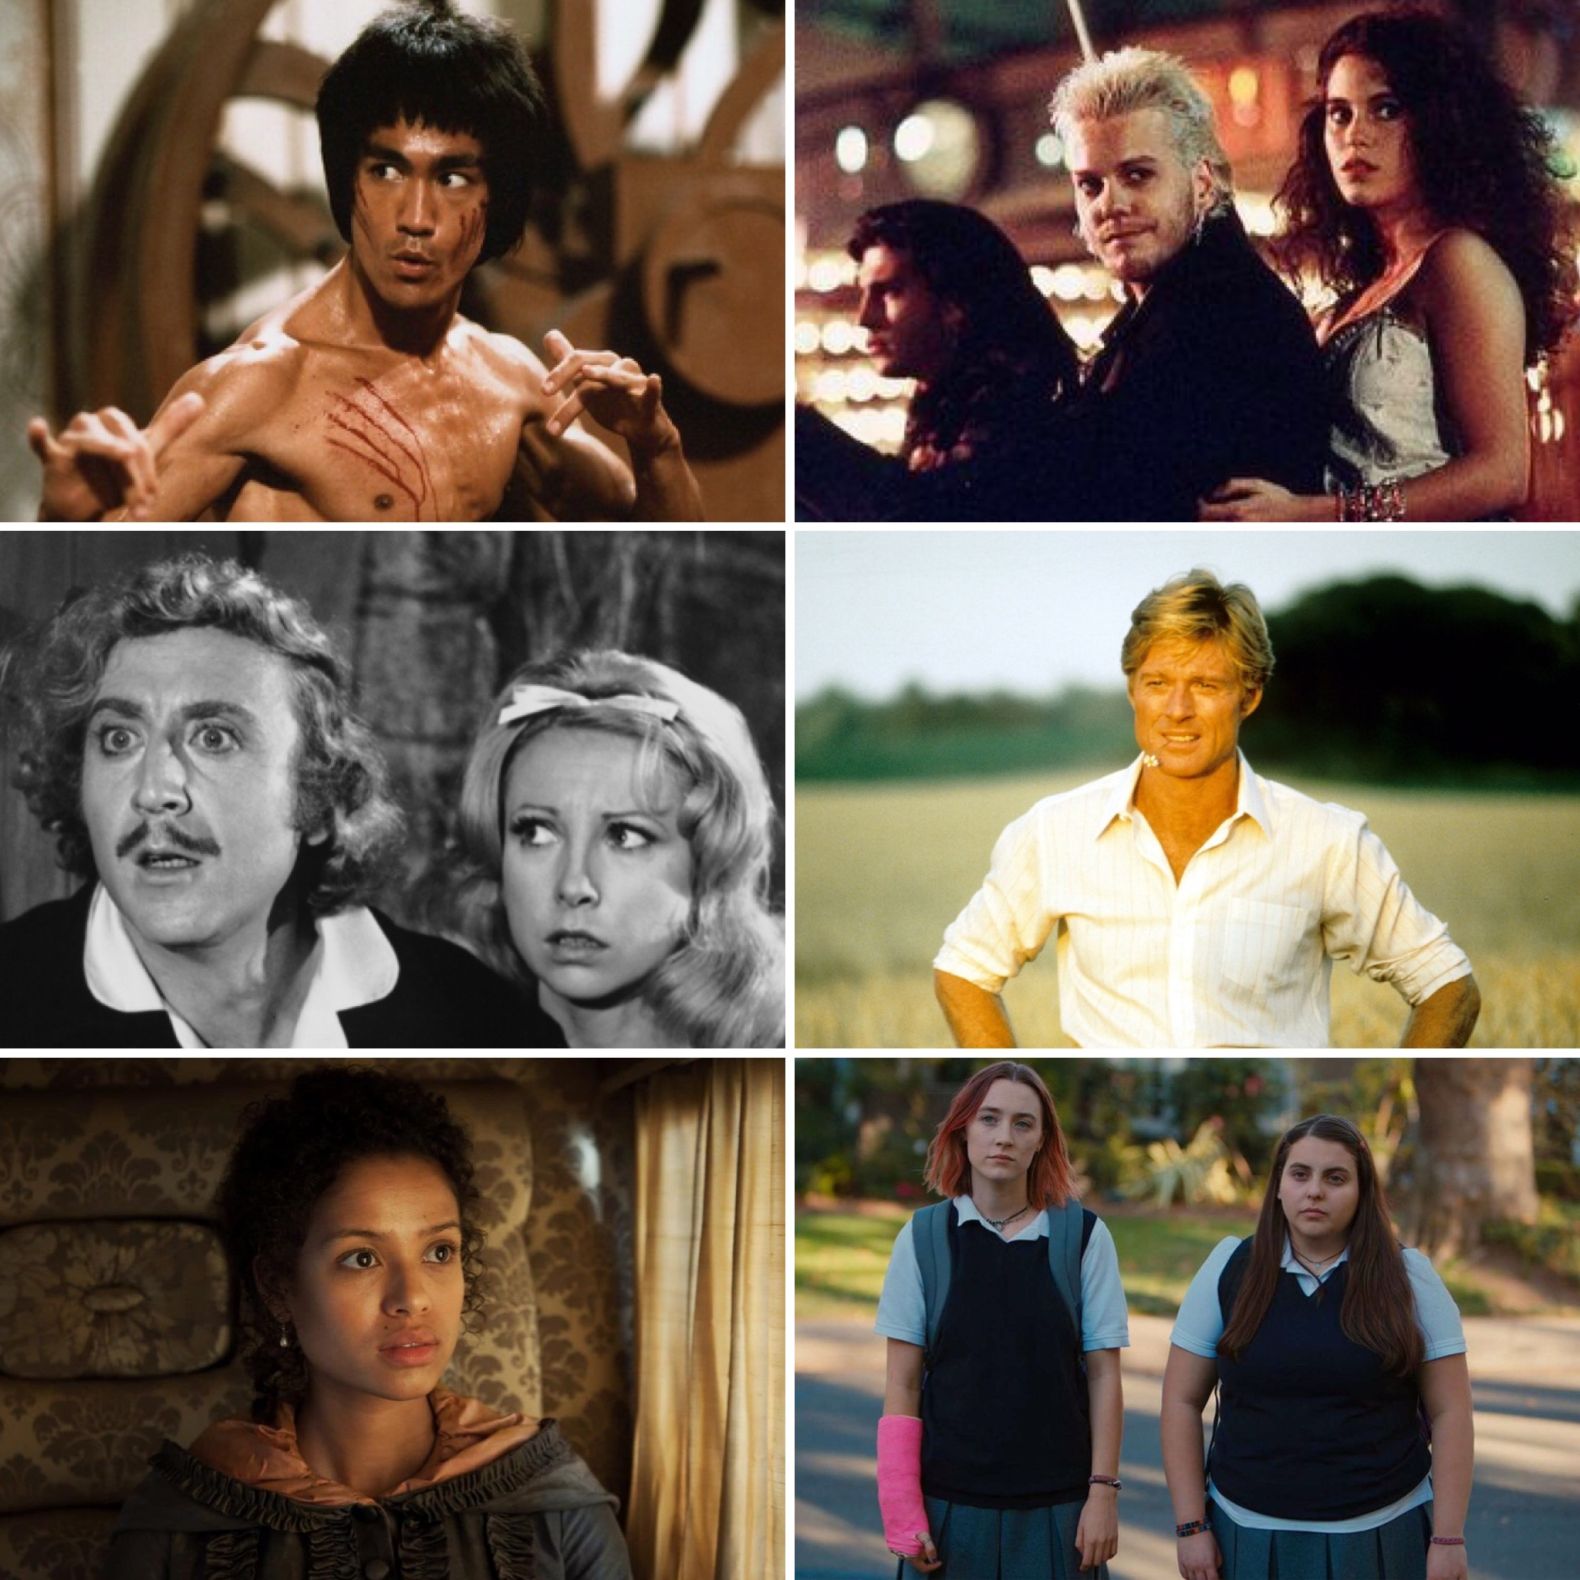 Duke Box #22: Our Guide to the Best Films on TV